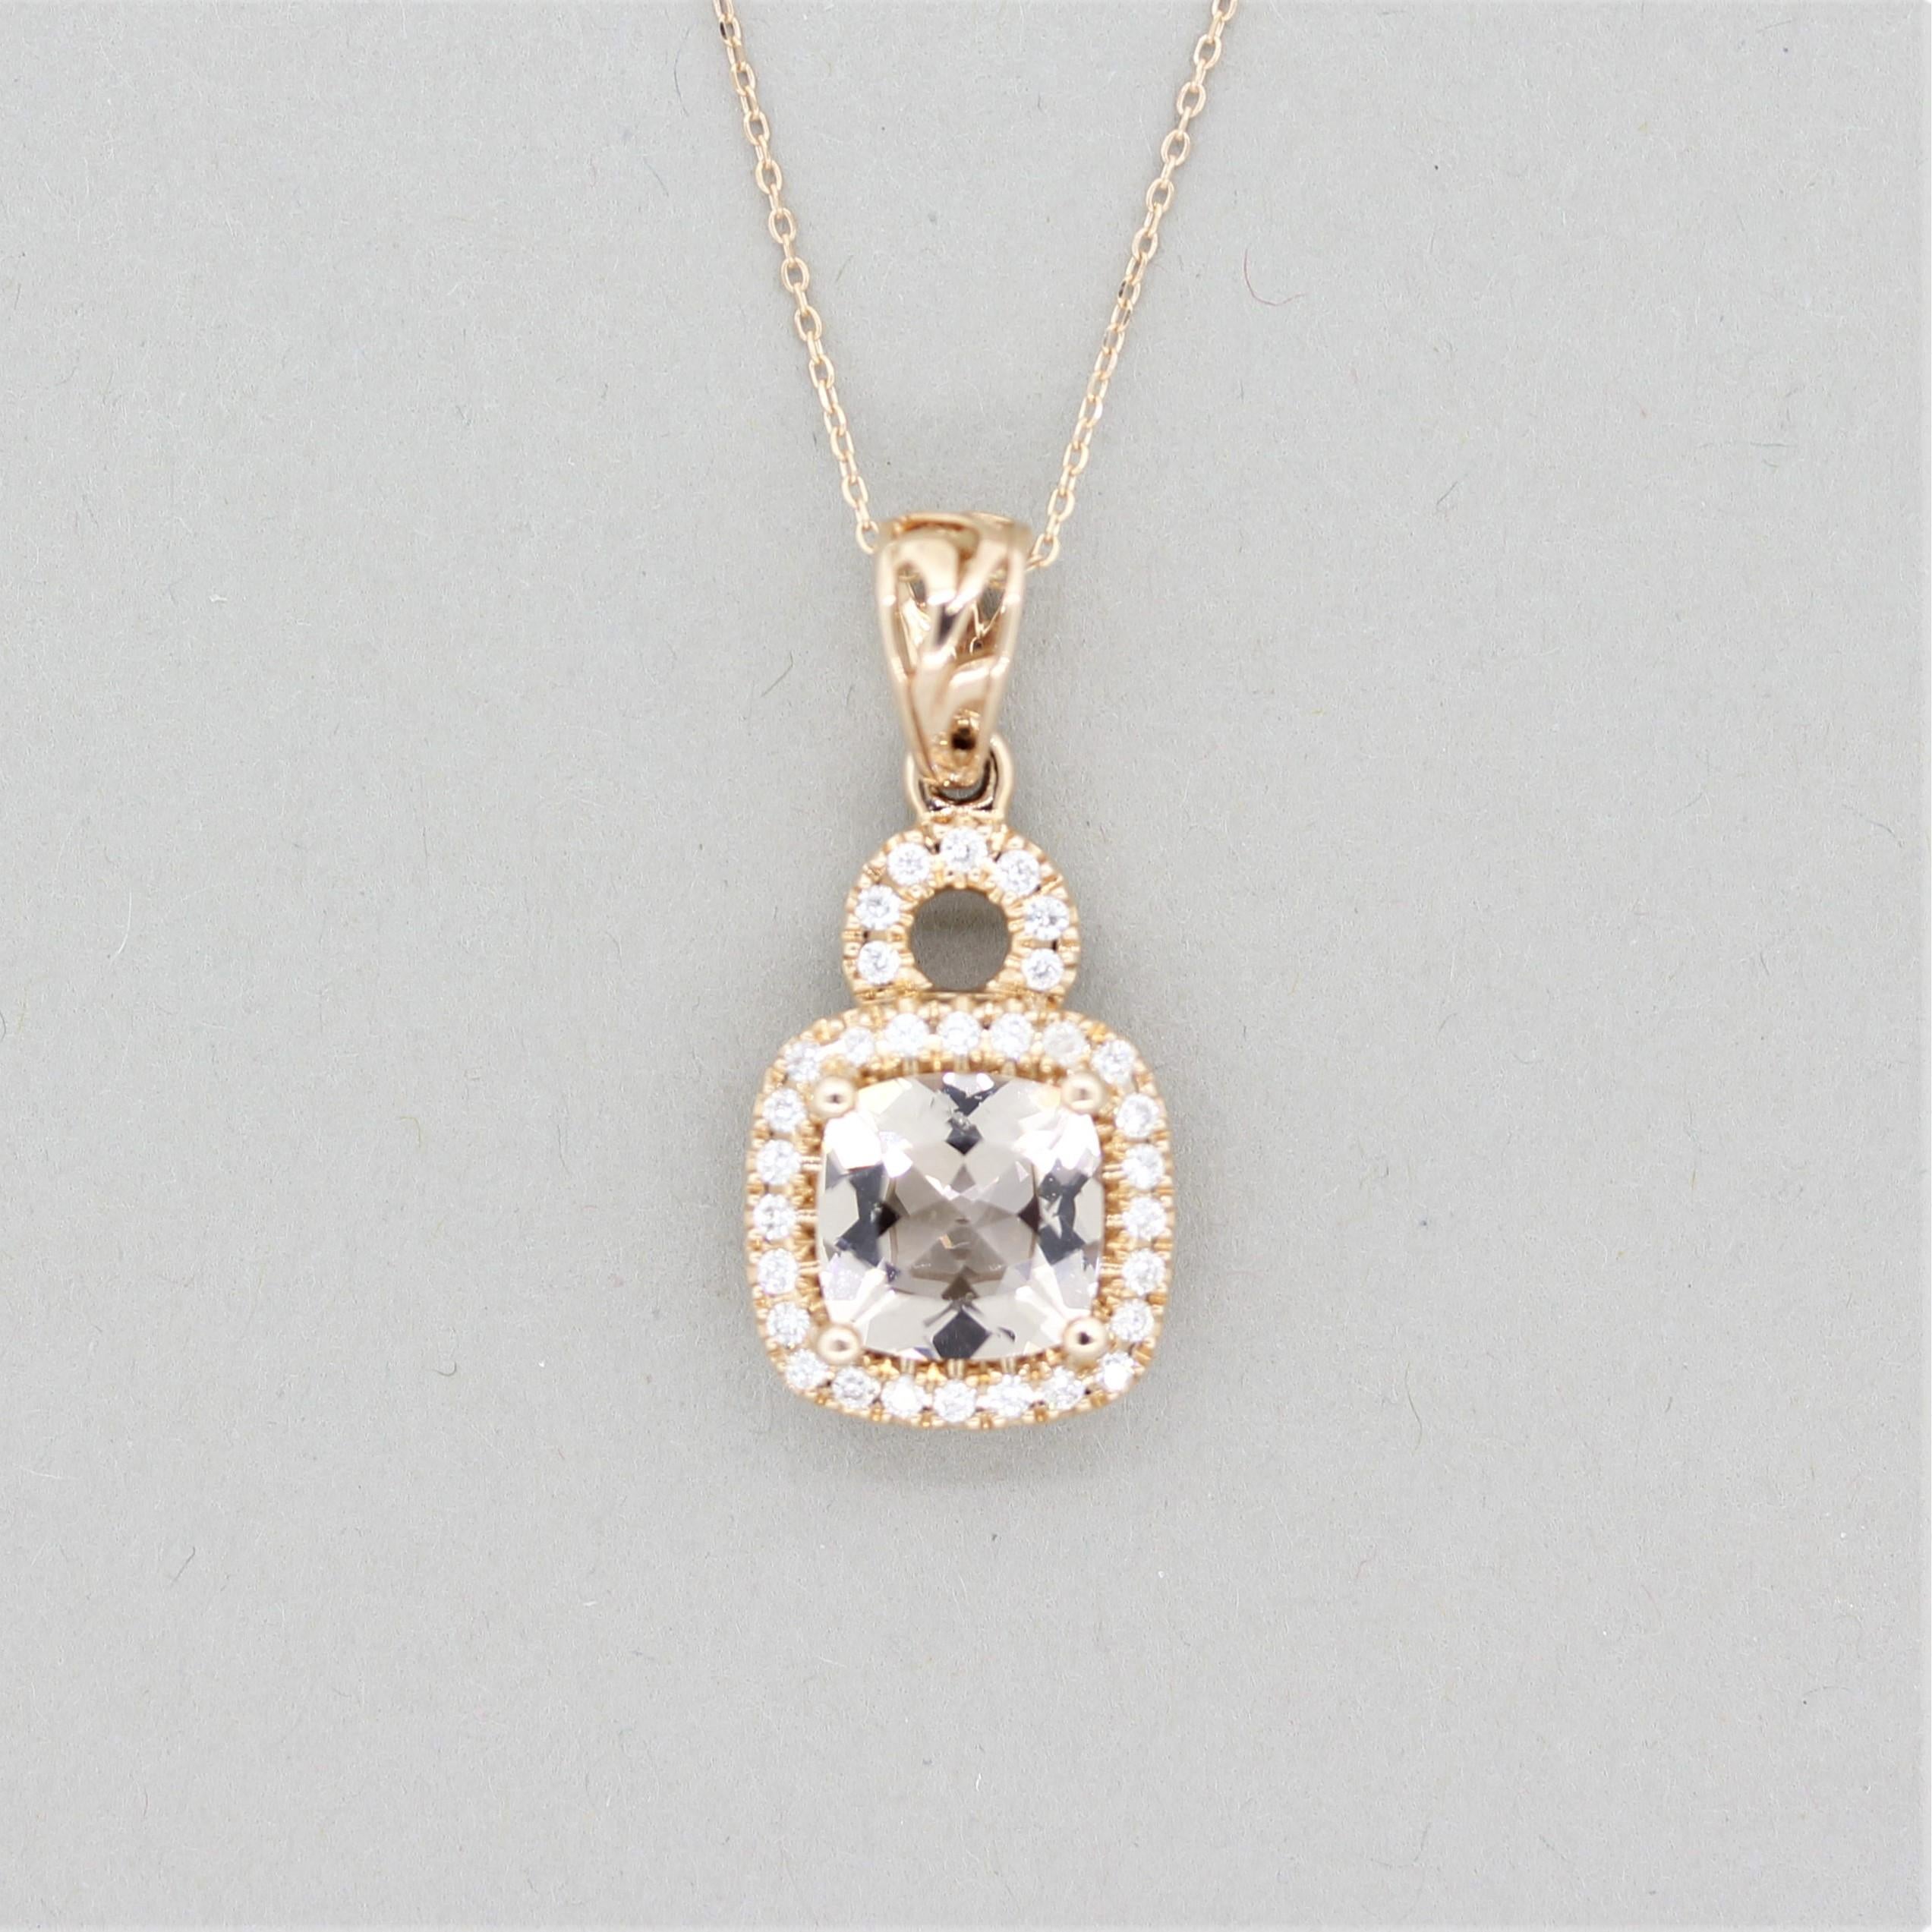 A sweet pendant featuring a 1.56 carat cushion-shaped morganite. It is accented by 0.44 carats of round brilliant-cut diamonds set around the pendant. Made in 14k rose gold.

Pendant Length: 1 inch

Chain Length: 18 inches